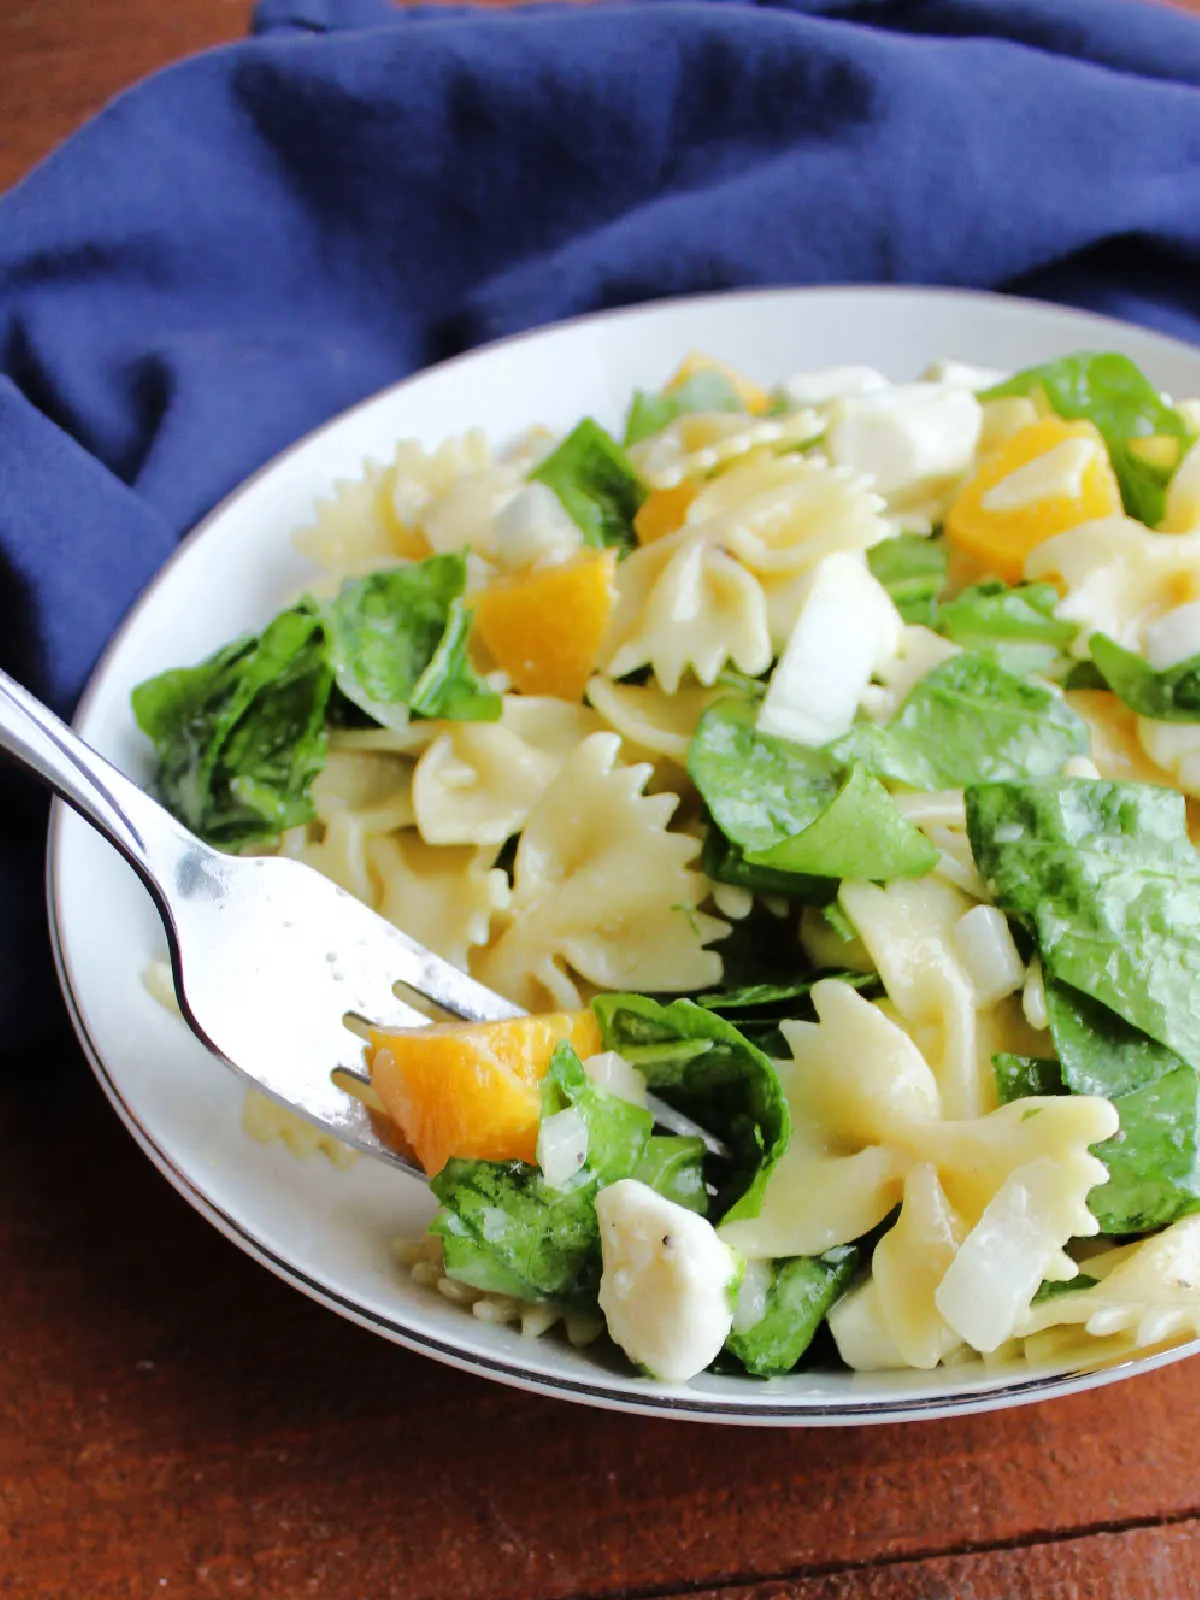 Bite of peach pasta salad with fresh spinach and a mozzarella pearl on fork.